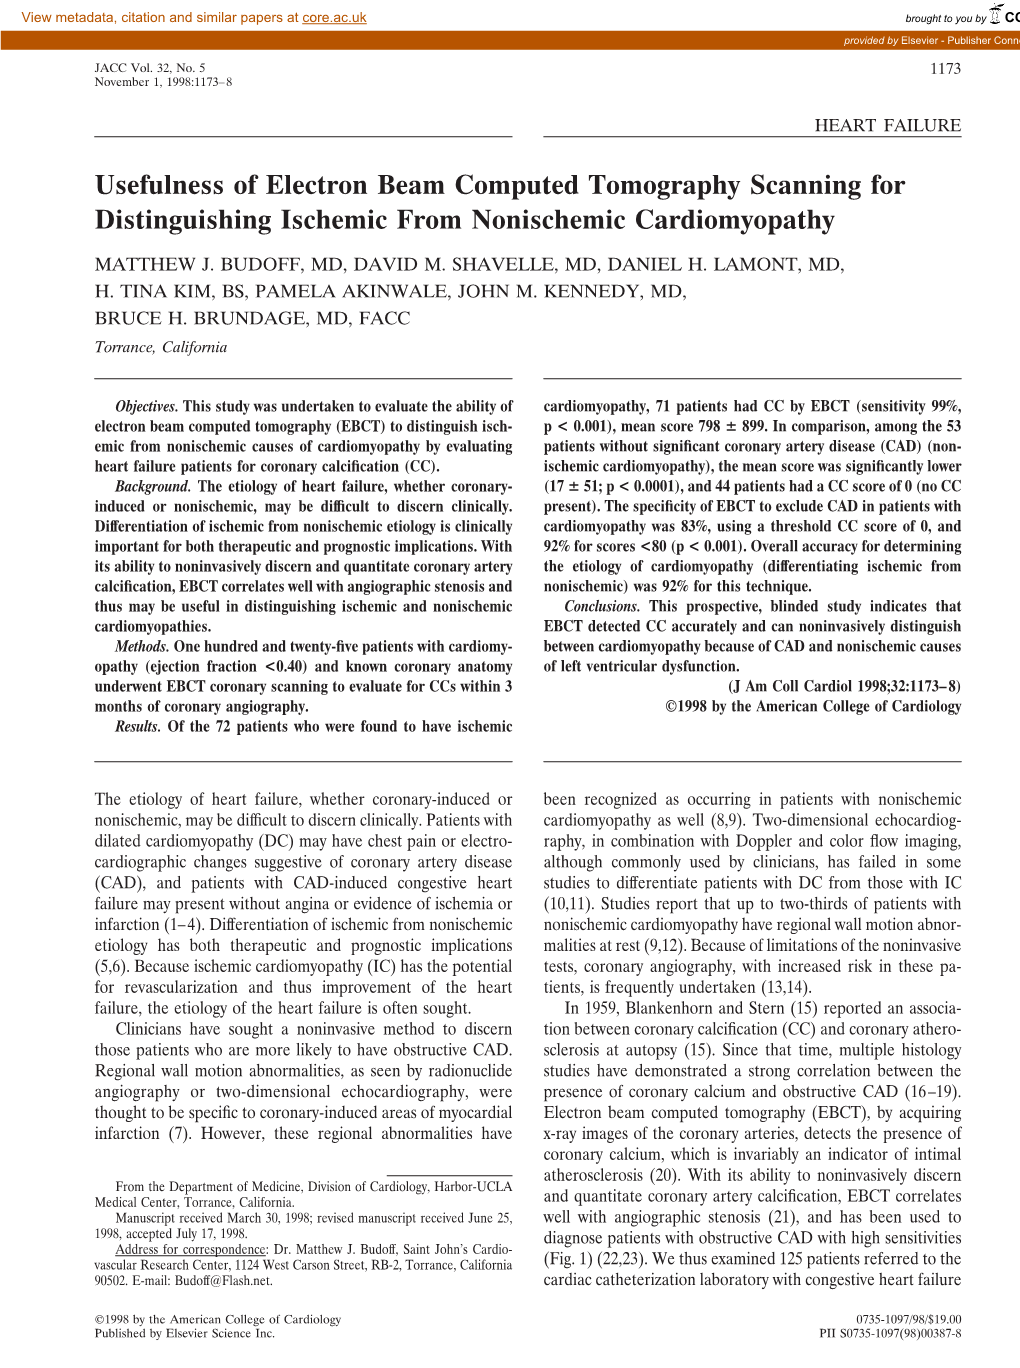 Usefulness of Electron Beam Computed Tomography Scanning for Distinguishing Ischemic from Nonischemic Cardiomyopathy